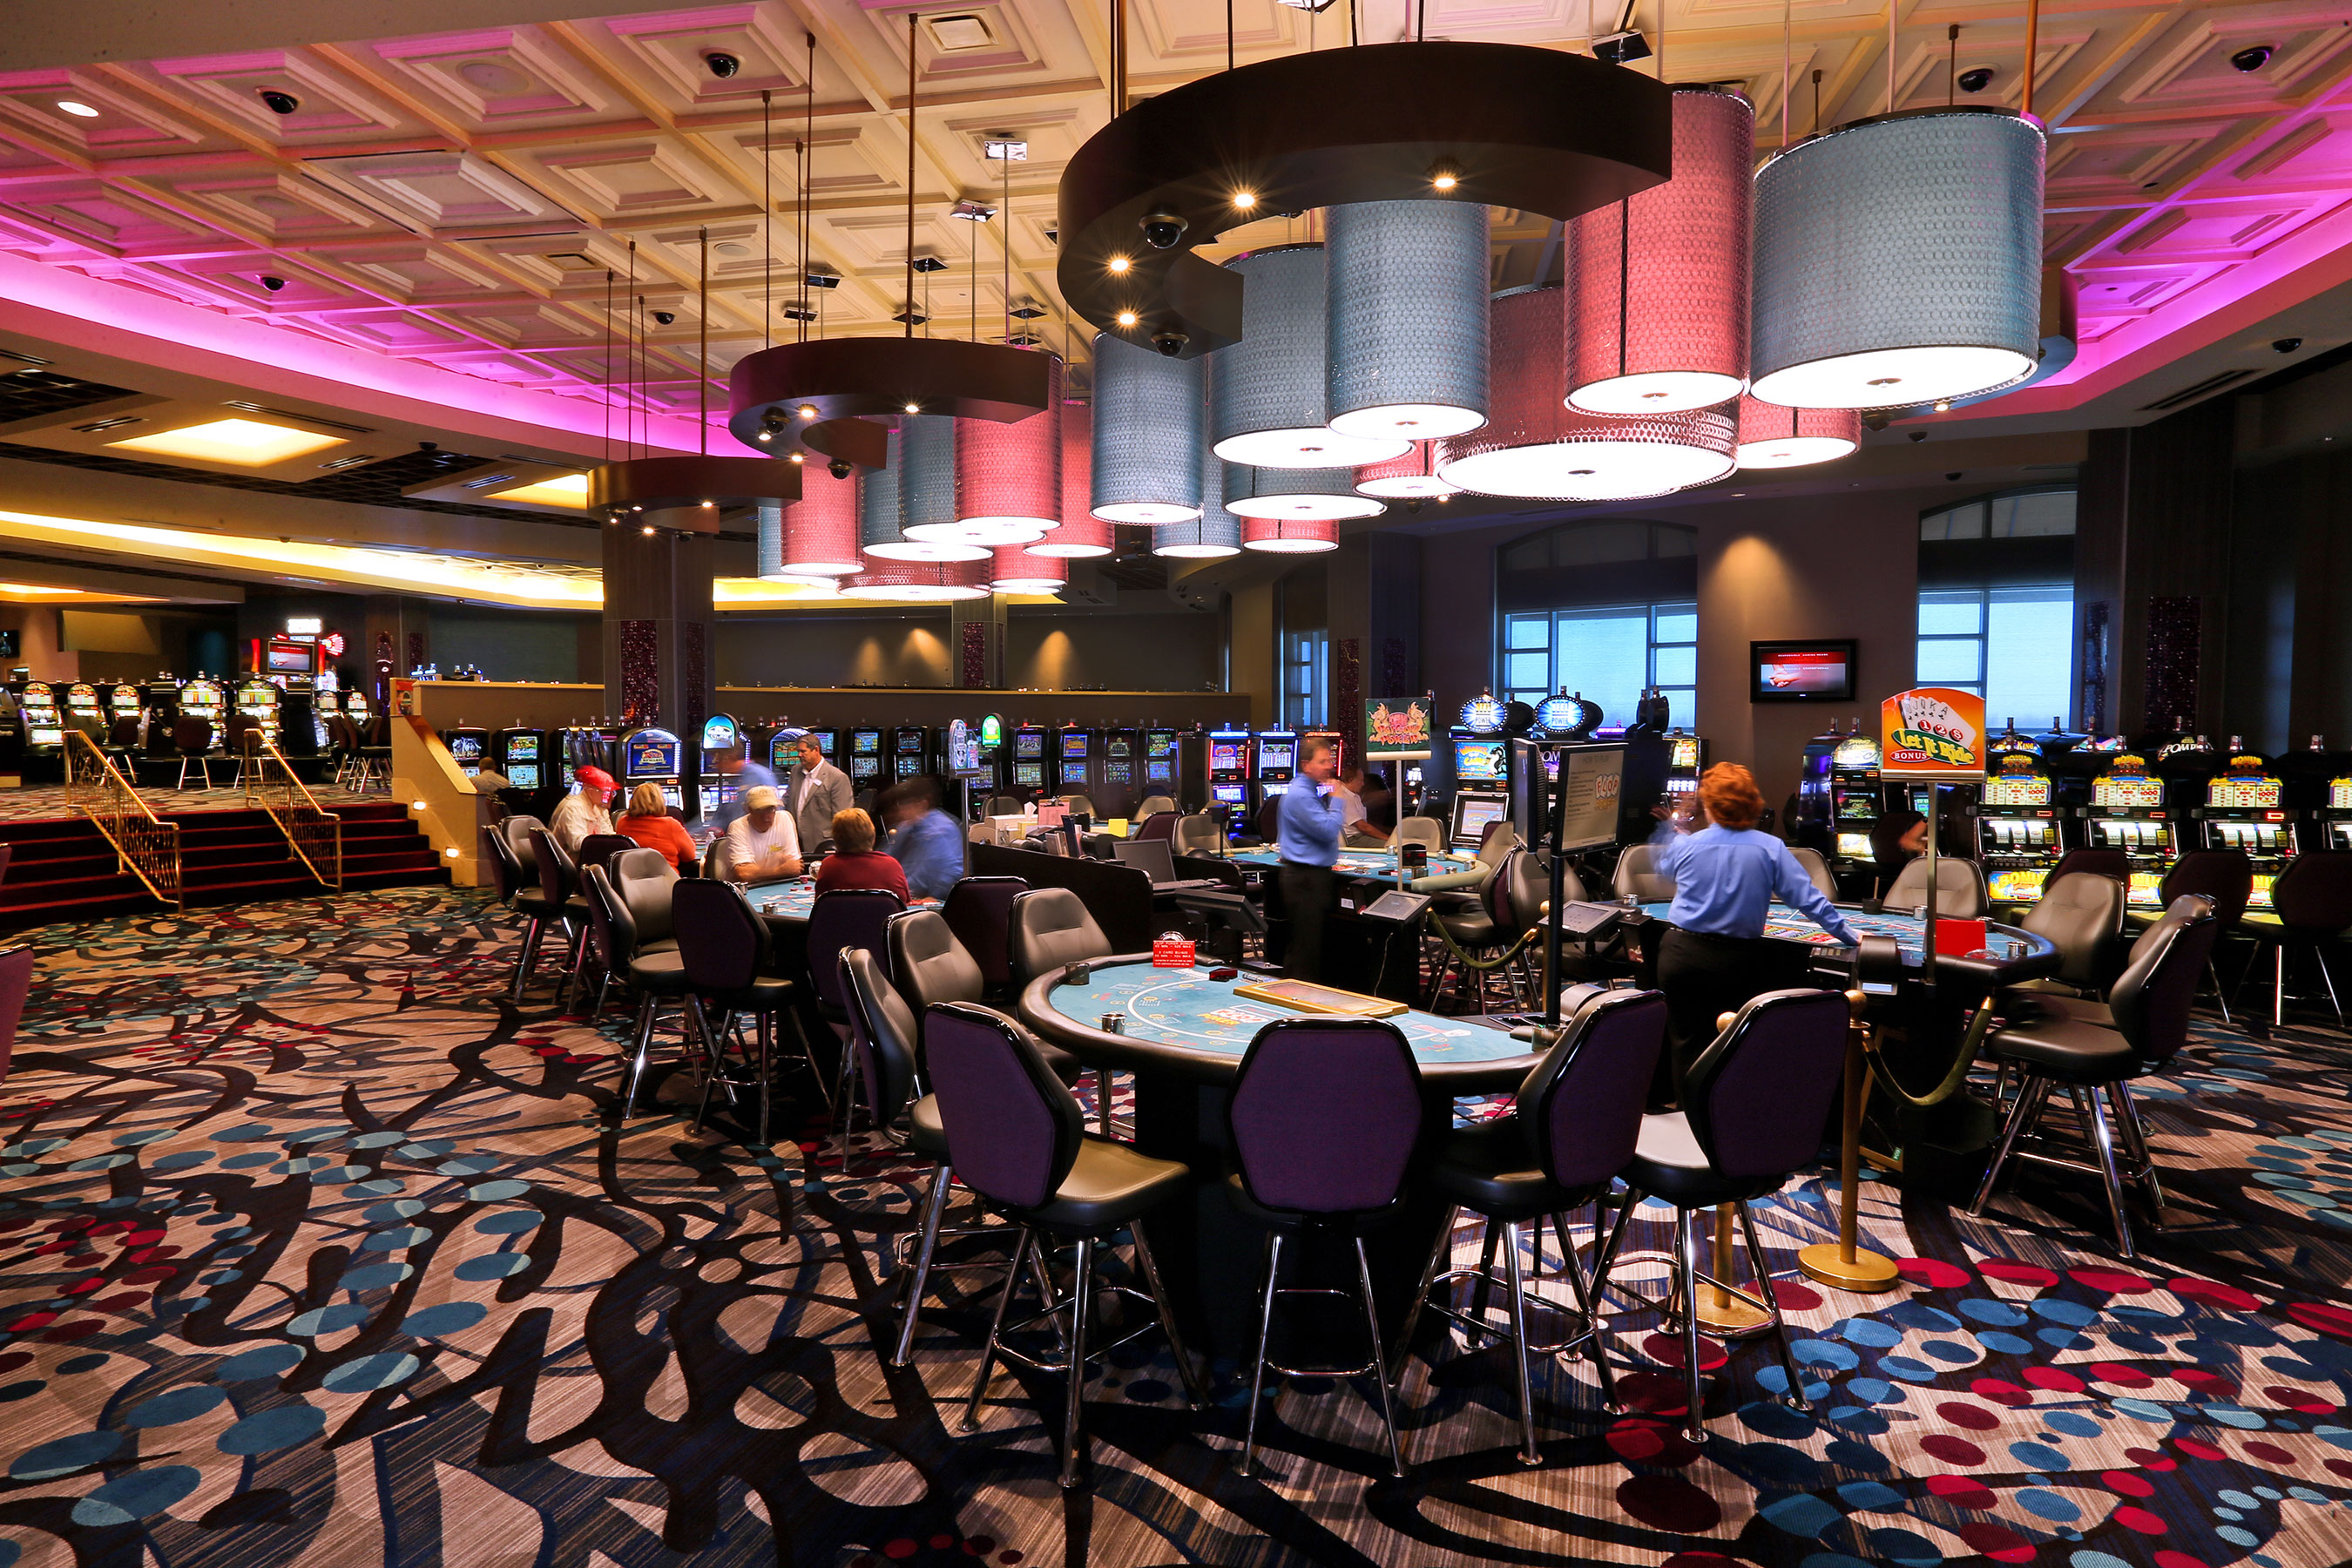 Harrah’s Gulf Coast, formerly The Grand Biloxi Casino, underwent a full transformation including a redesign of the casino floor